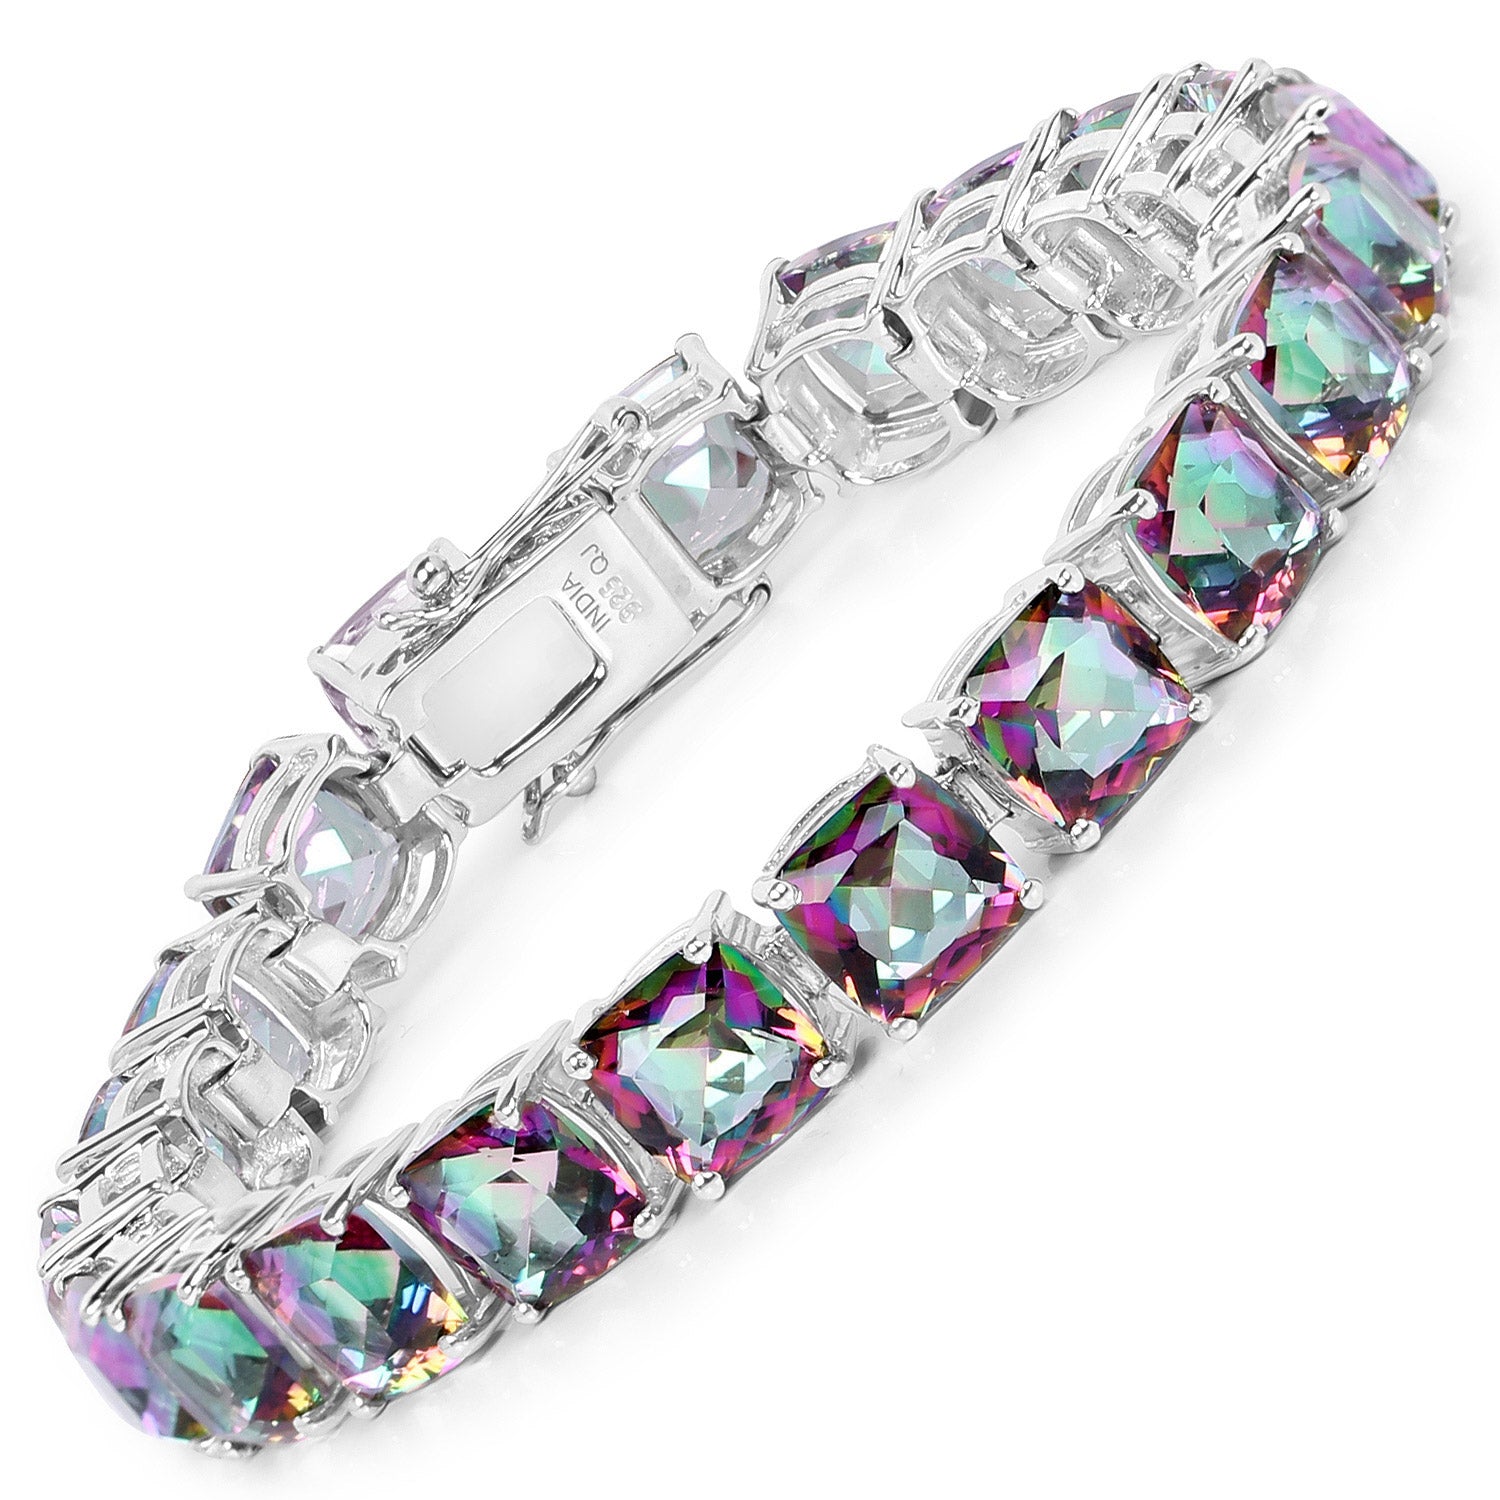 Dive into joy with our Rainbow Quartz bracelet, a celebration of life's beauty. Crafted with precision, it's a vibrant addition to any collection